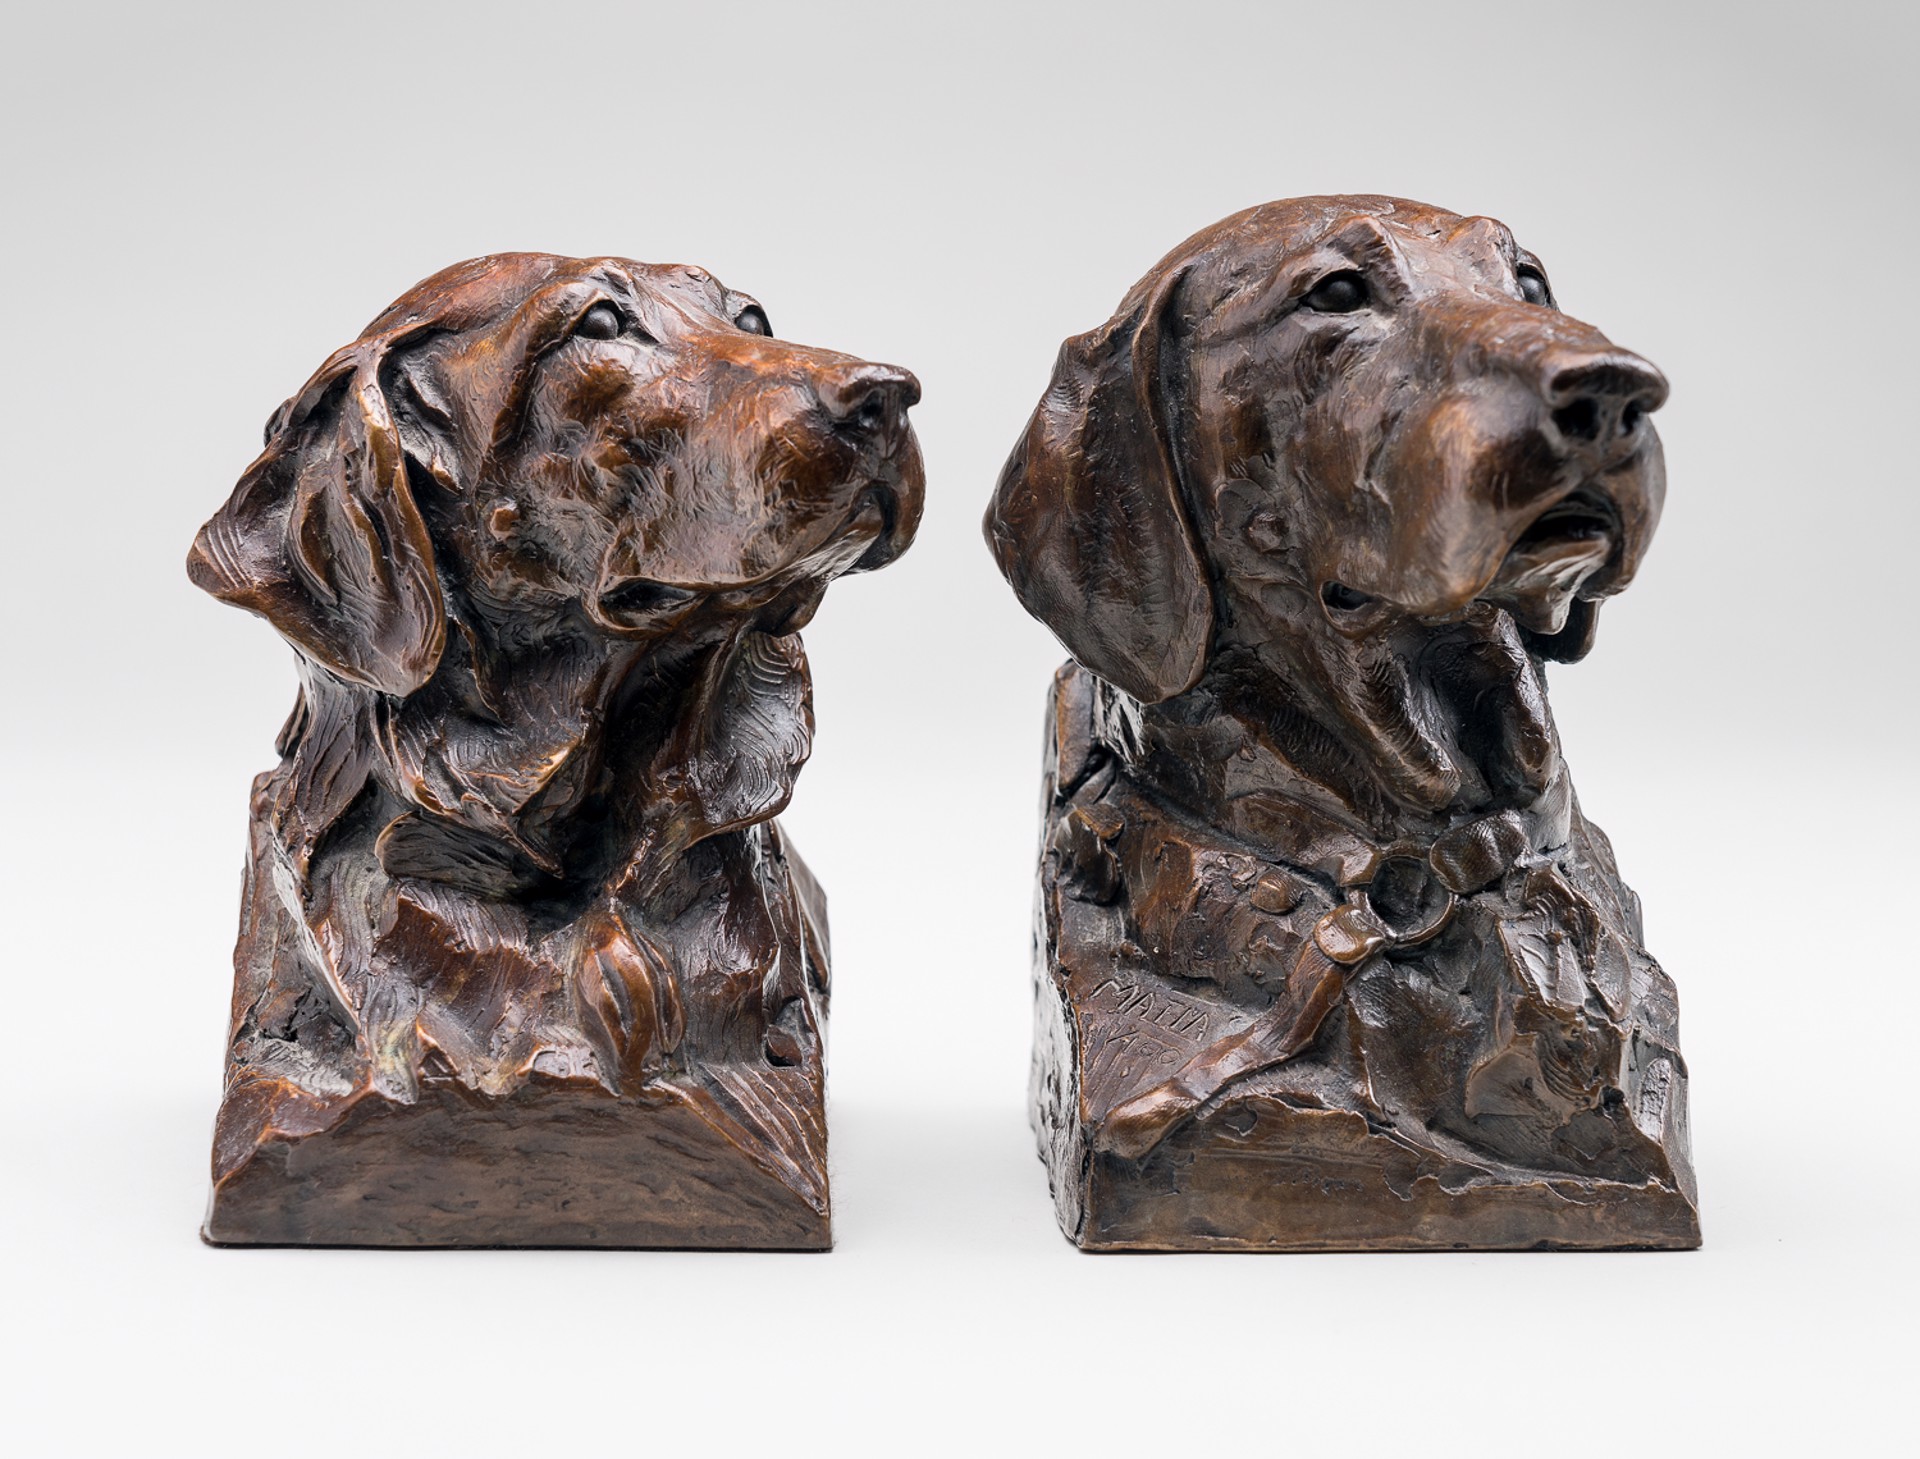 ‘A POINTER’ & ‘A SETTER’ (Book Ends) by Walter Matia